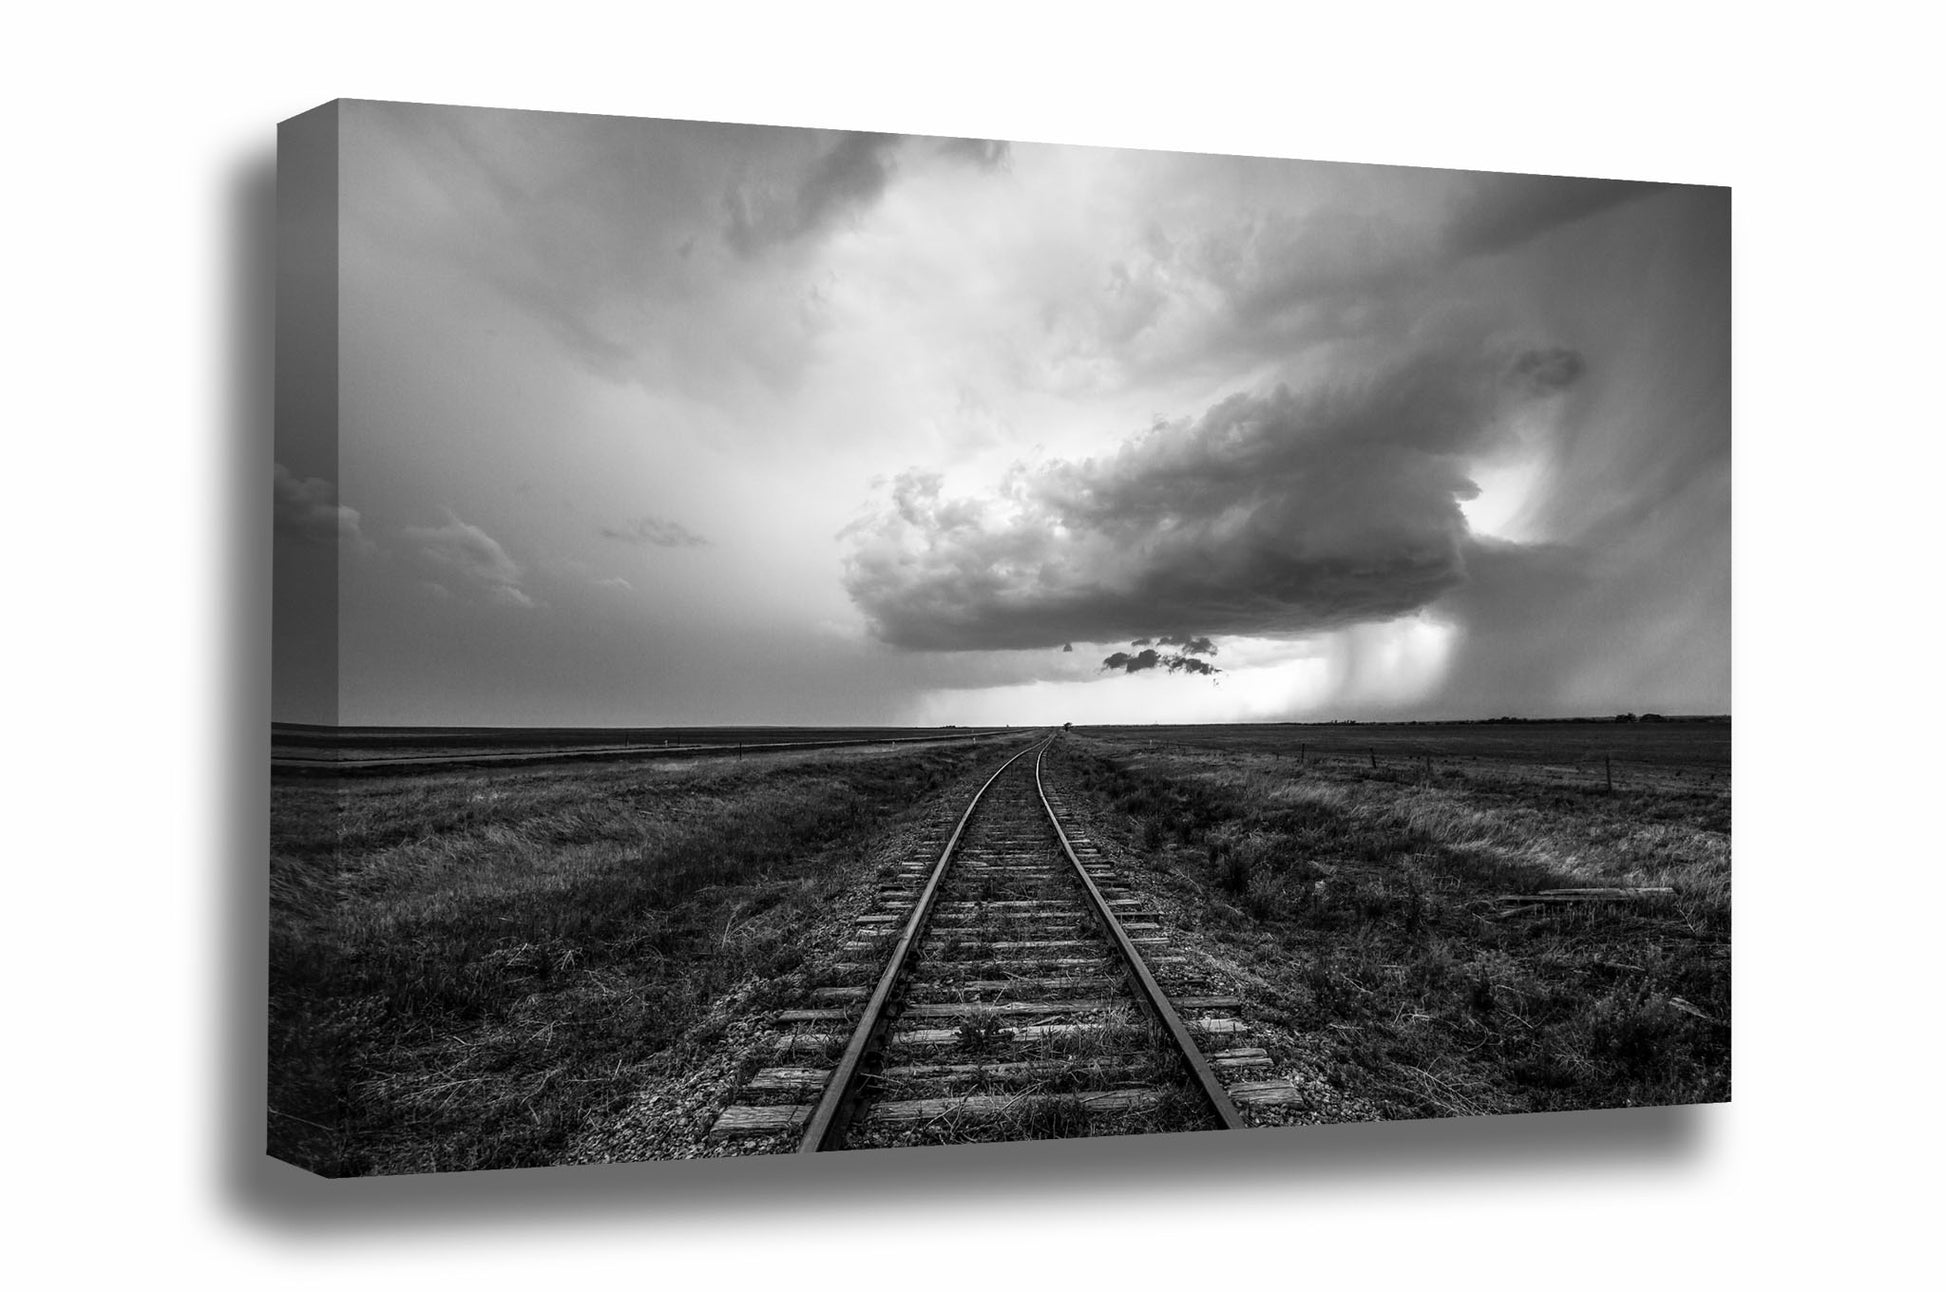 Black and white  wanderlust canvas wall art of railroad tracks leading to a distant storm cloud on a stormy day on the plains of Kansas by Sean Ramsey of Southern Plains Photography.